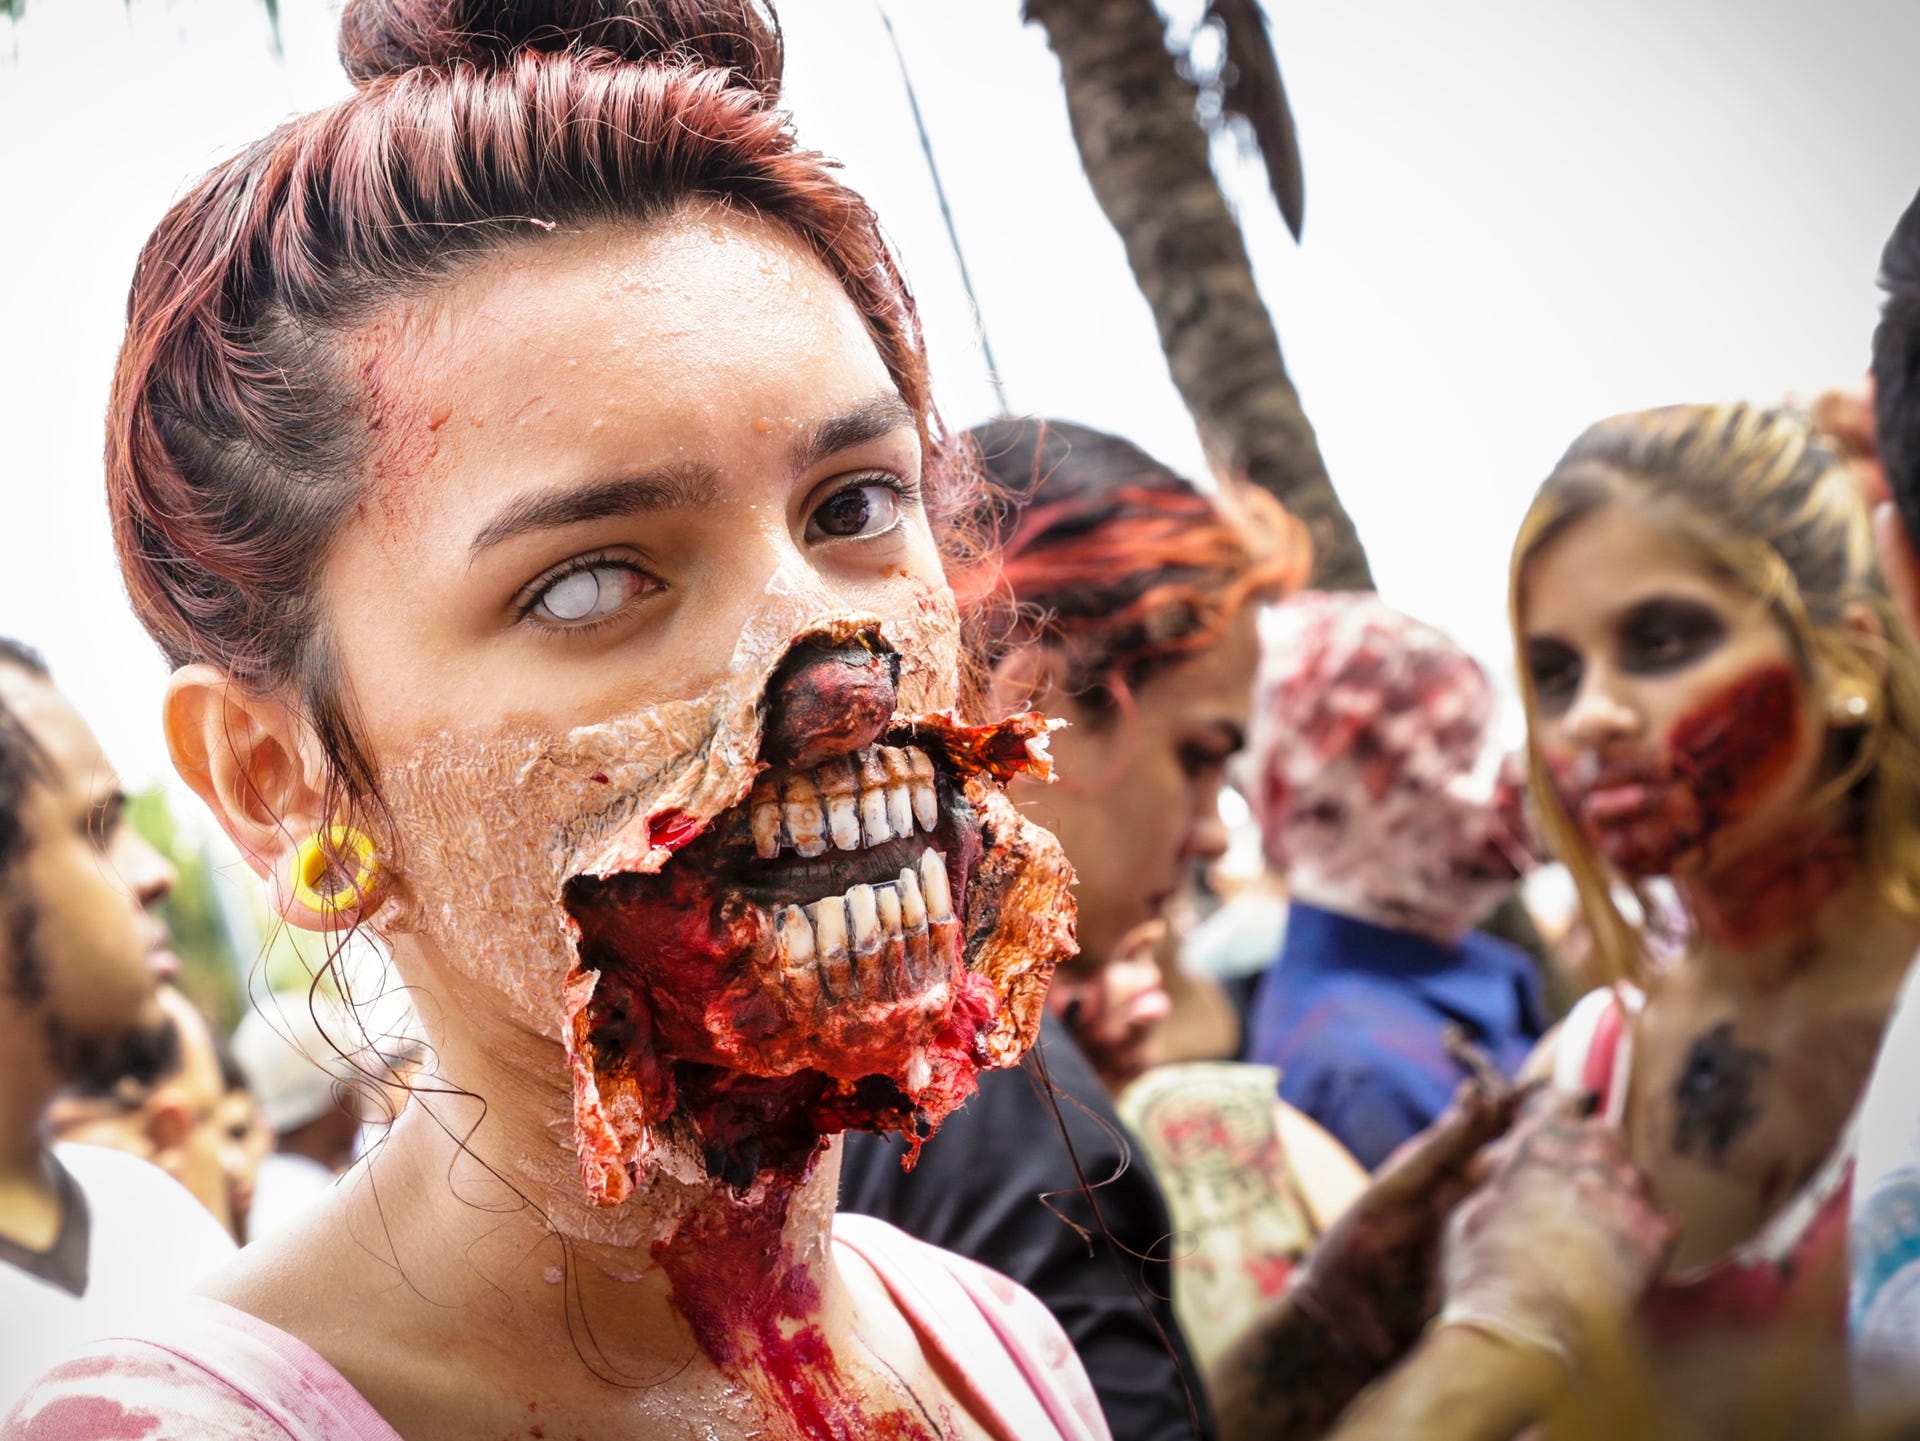 puts Zombie Apocalypse clause into terms and conditions - CNET